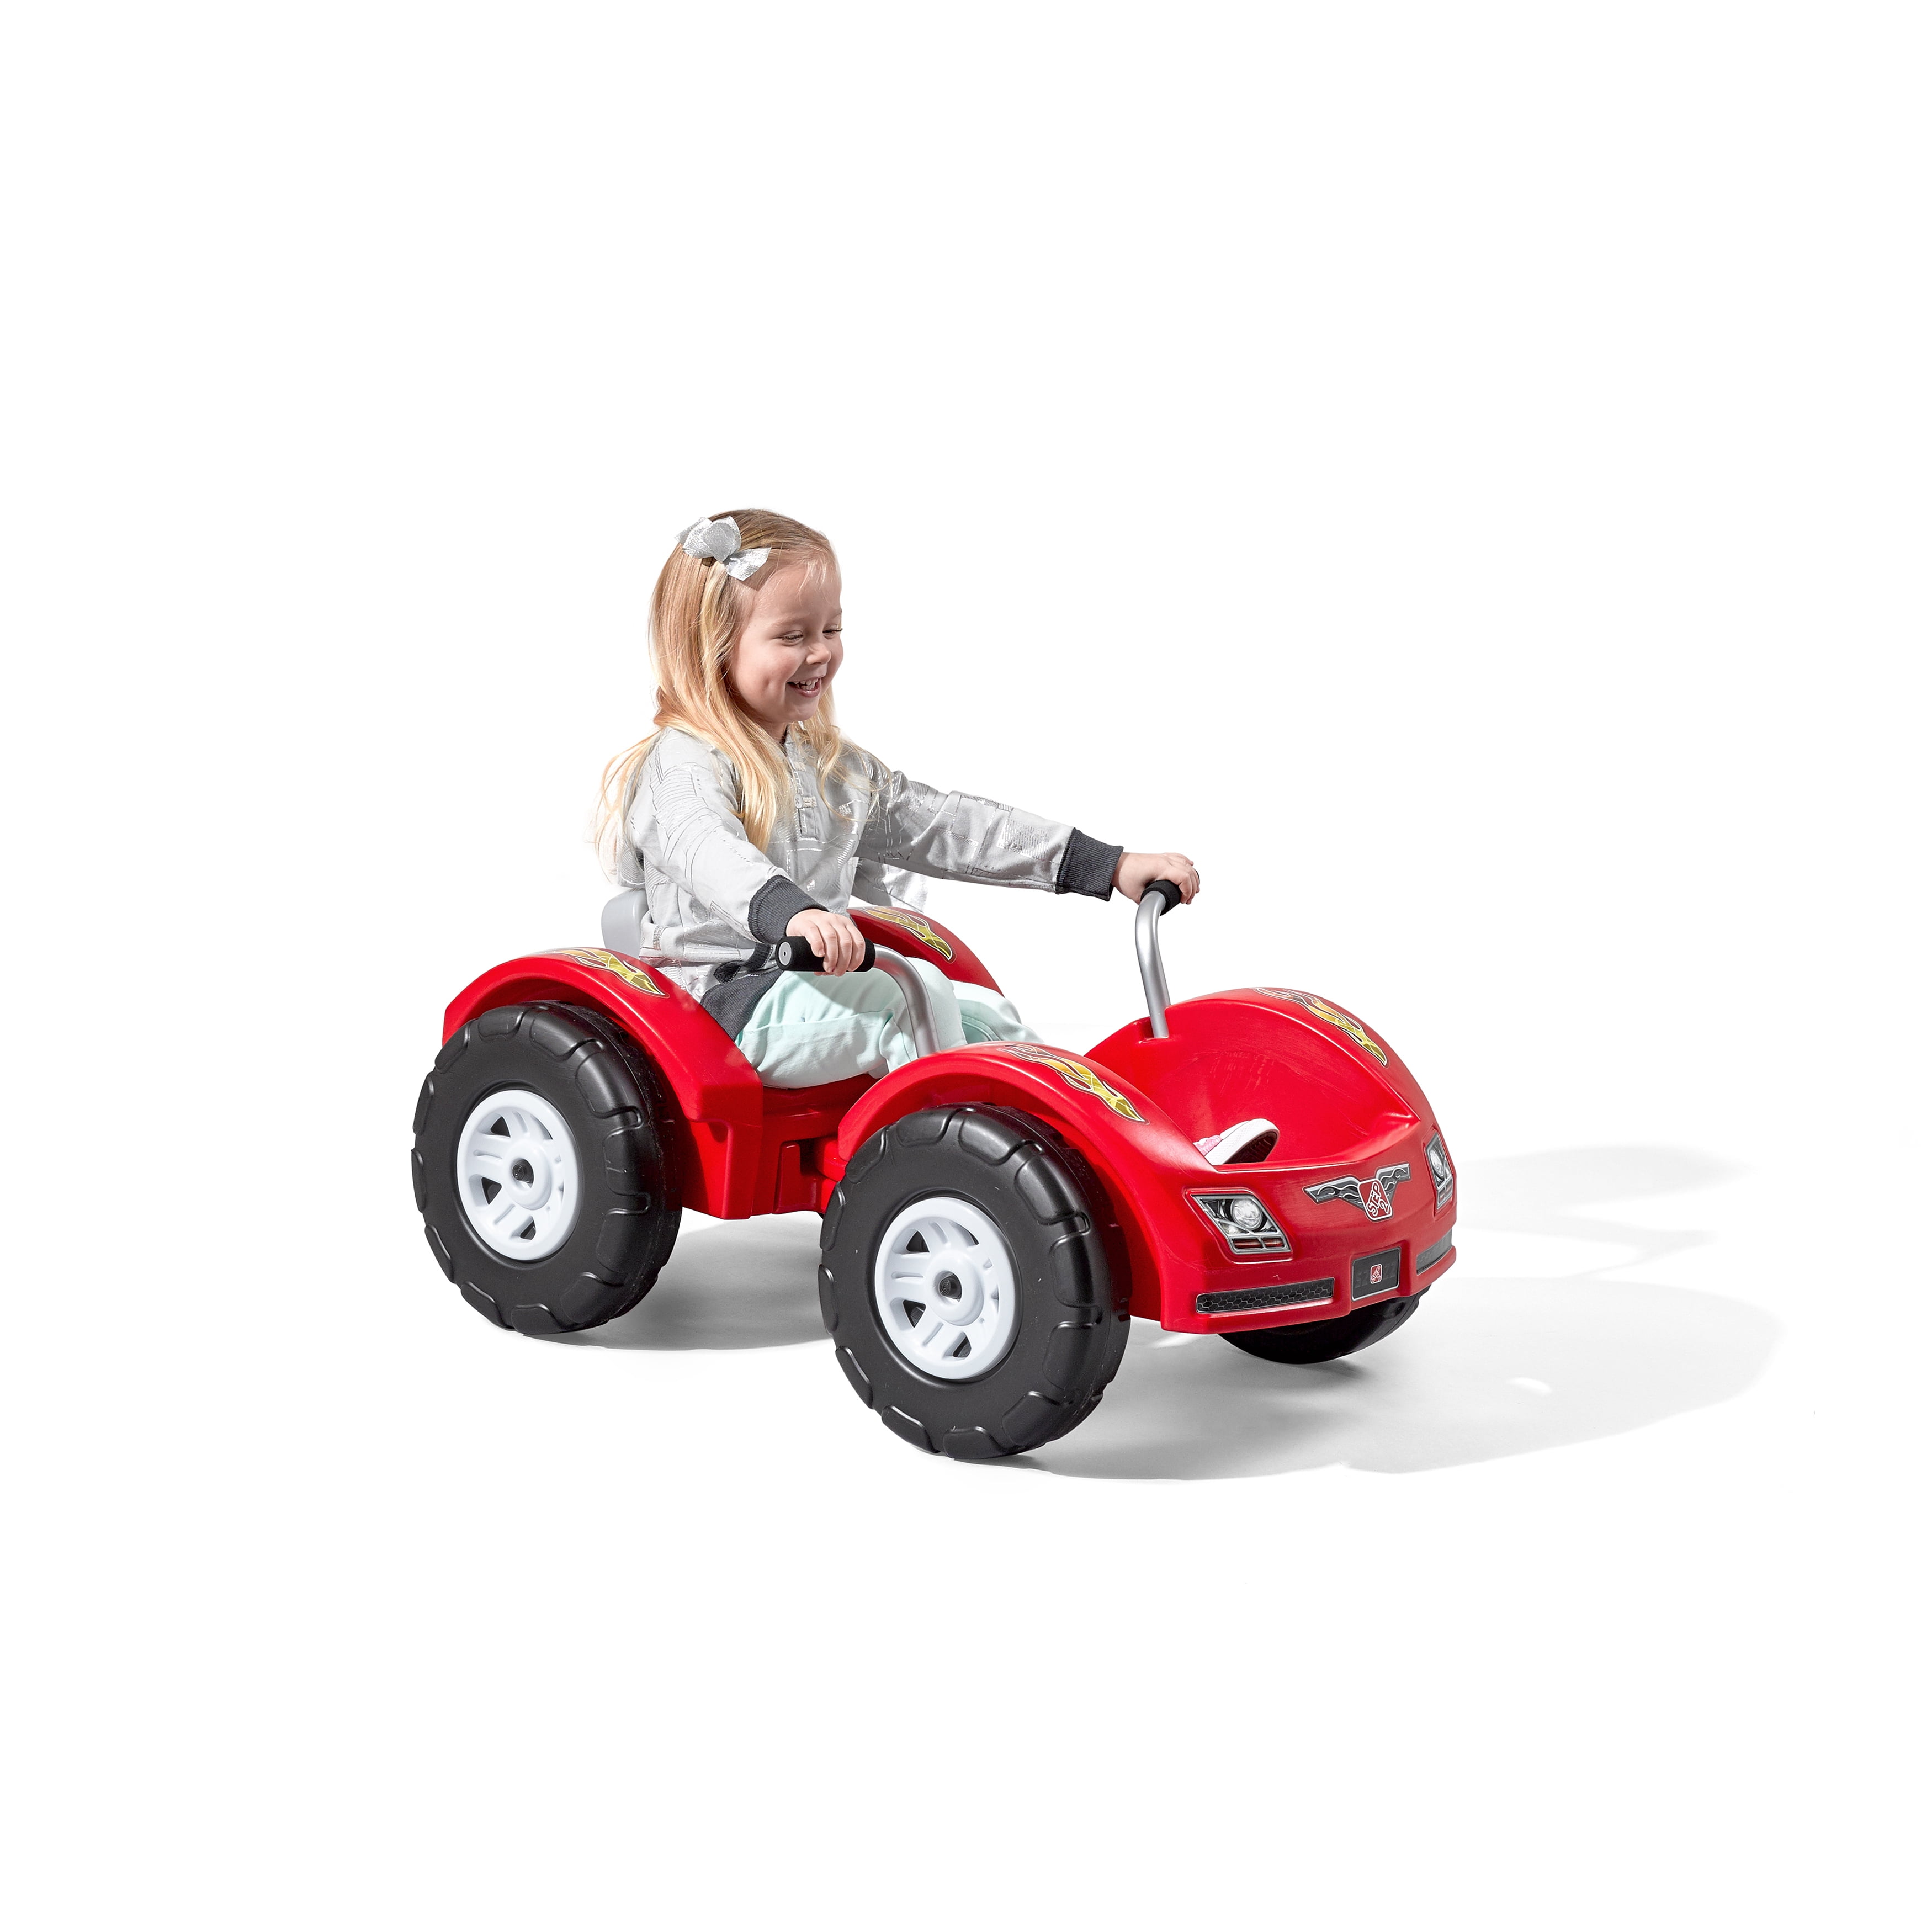 Step2 Zip N Zoom Pedal Car RideOn With Easy Grip Handles For Kids, Red -  Walmart.com